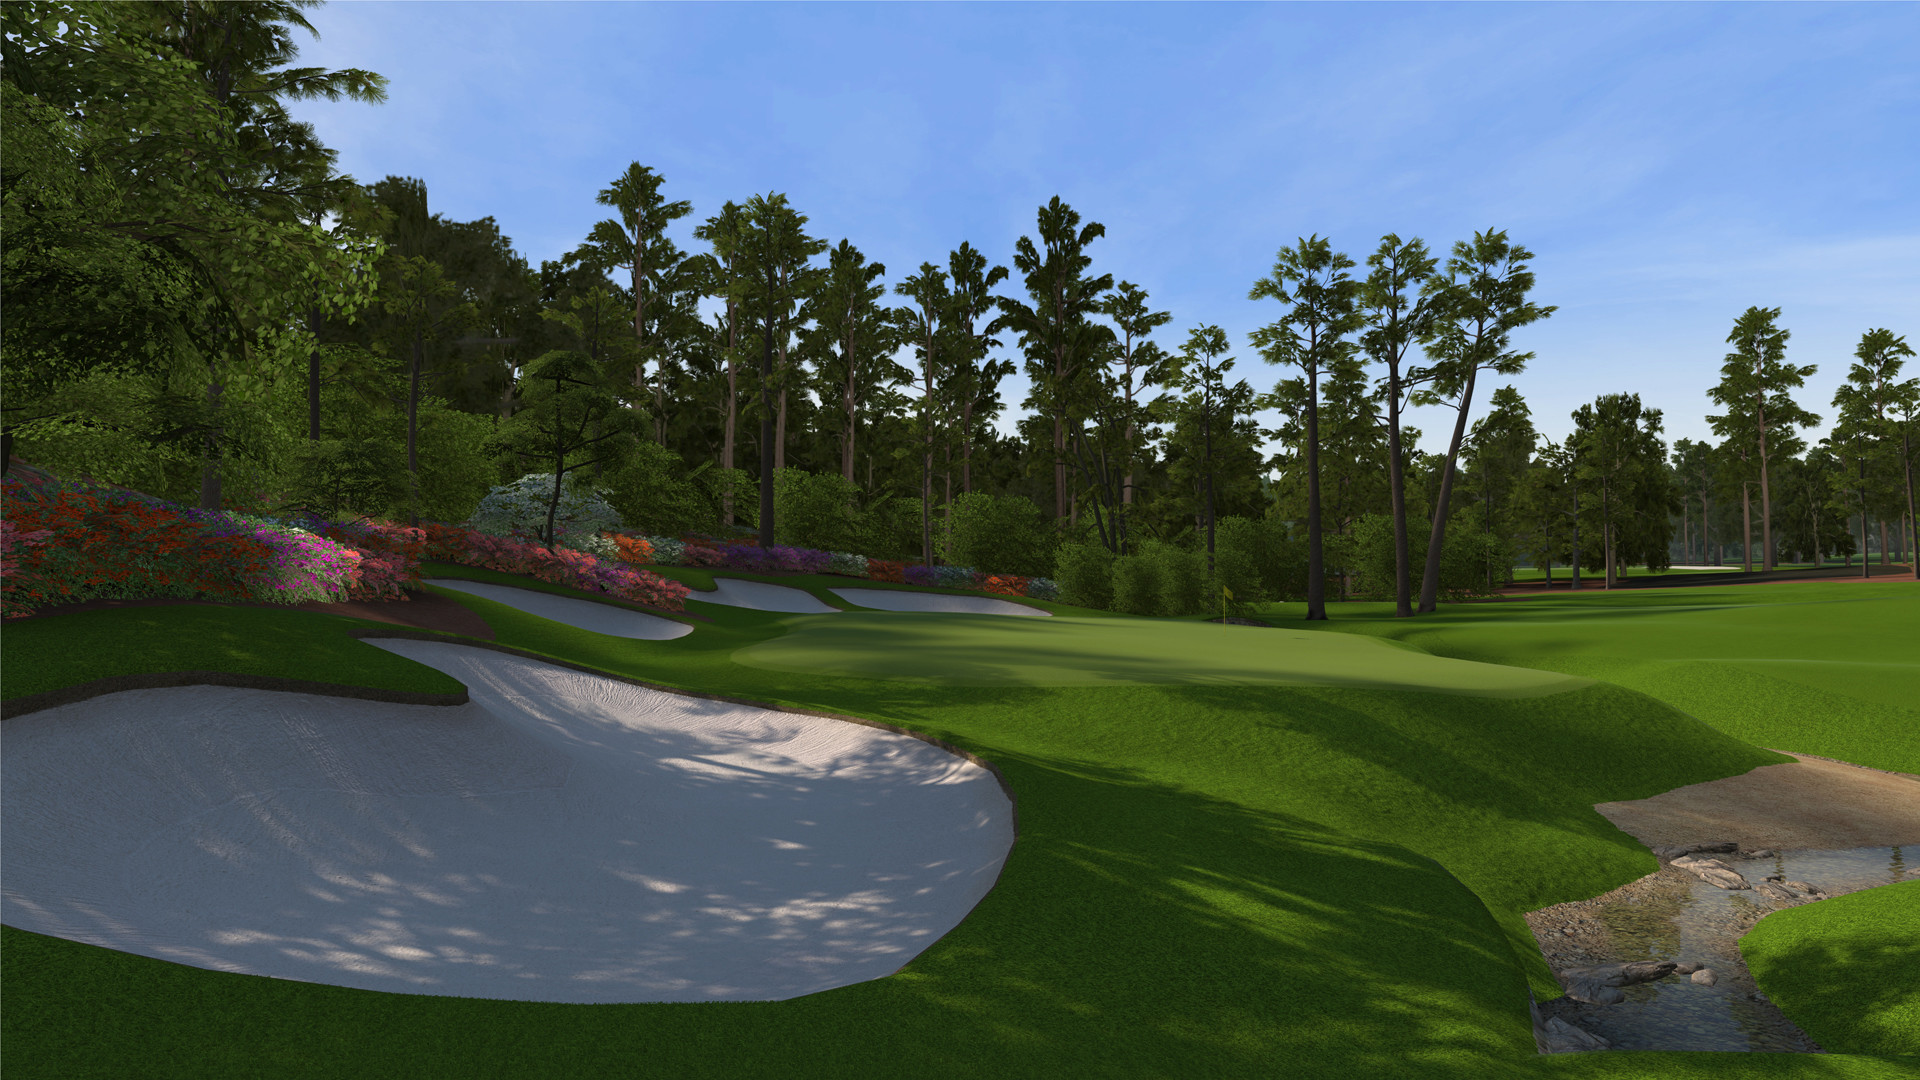 1920x1080 5 Things: Your chance to play Augusta National